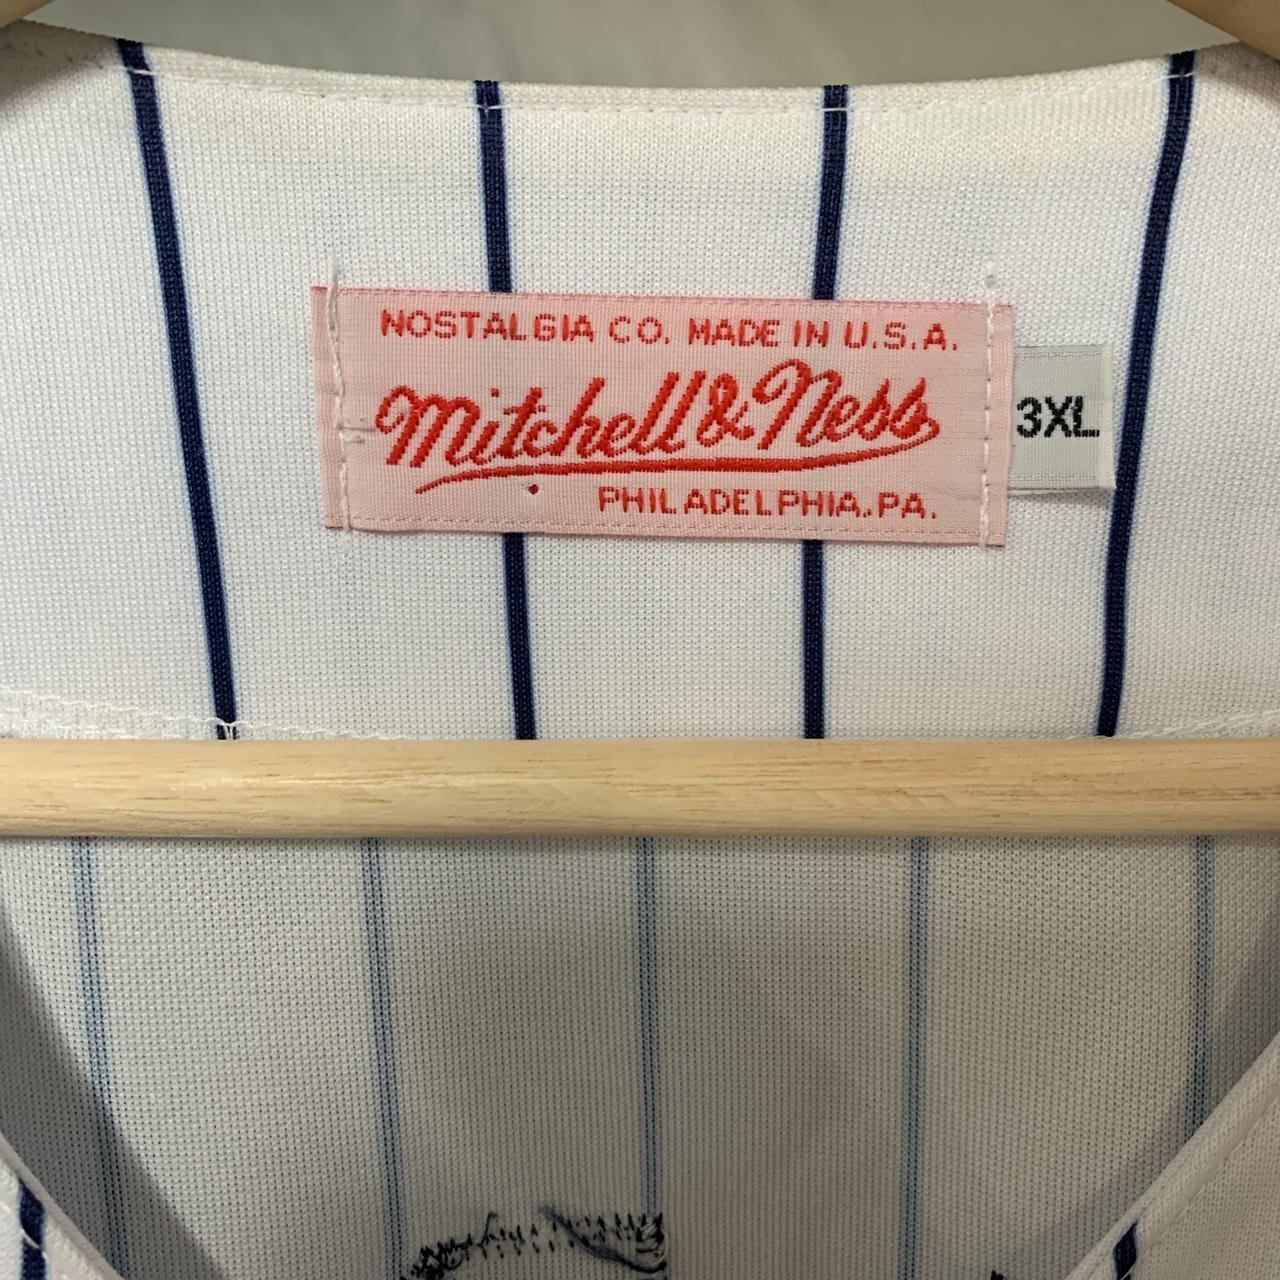 Mitchell & Ness Yankees Jersey Iconic and classic - Depop